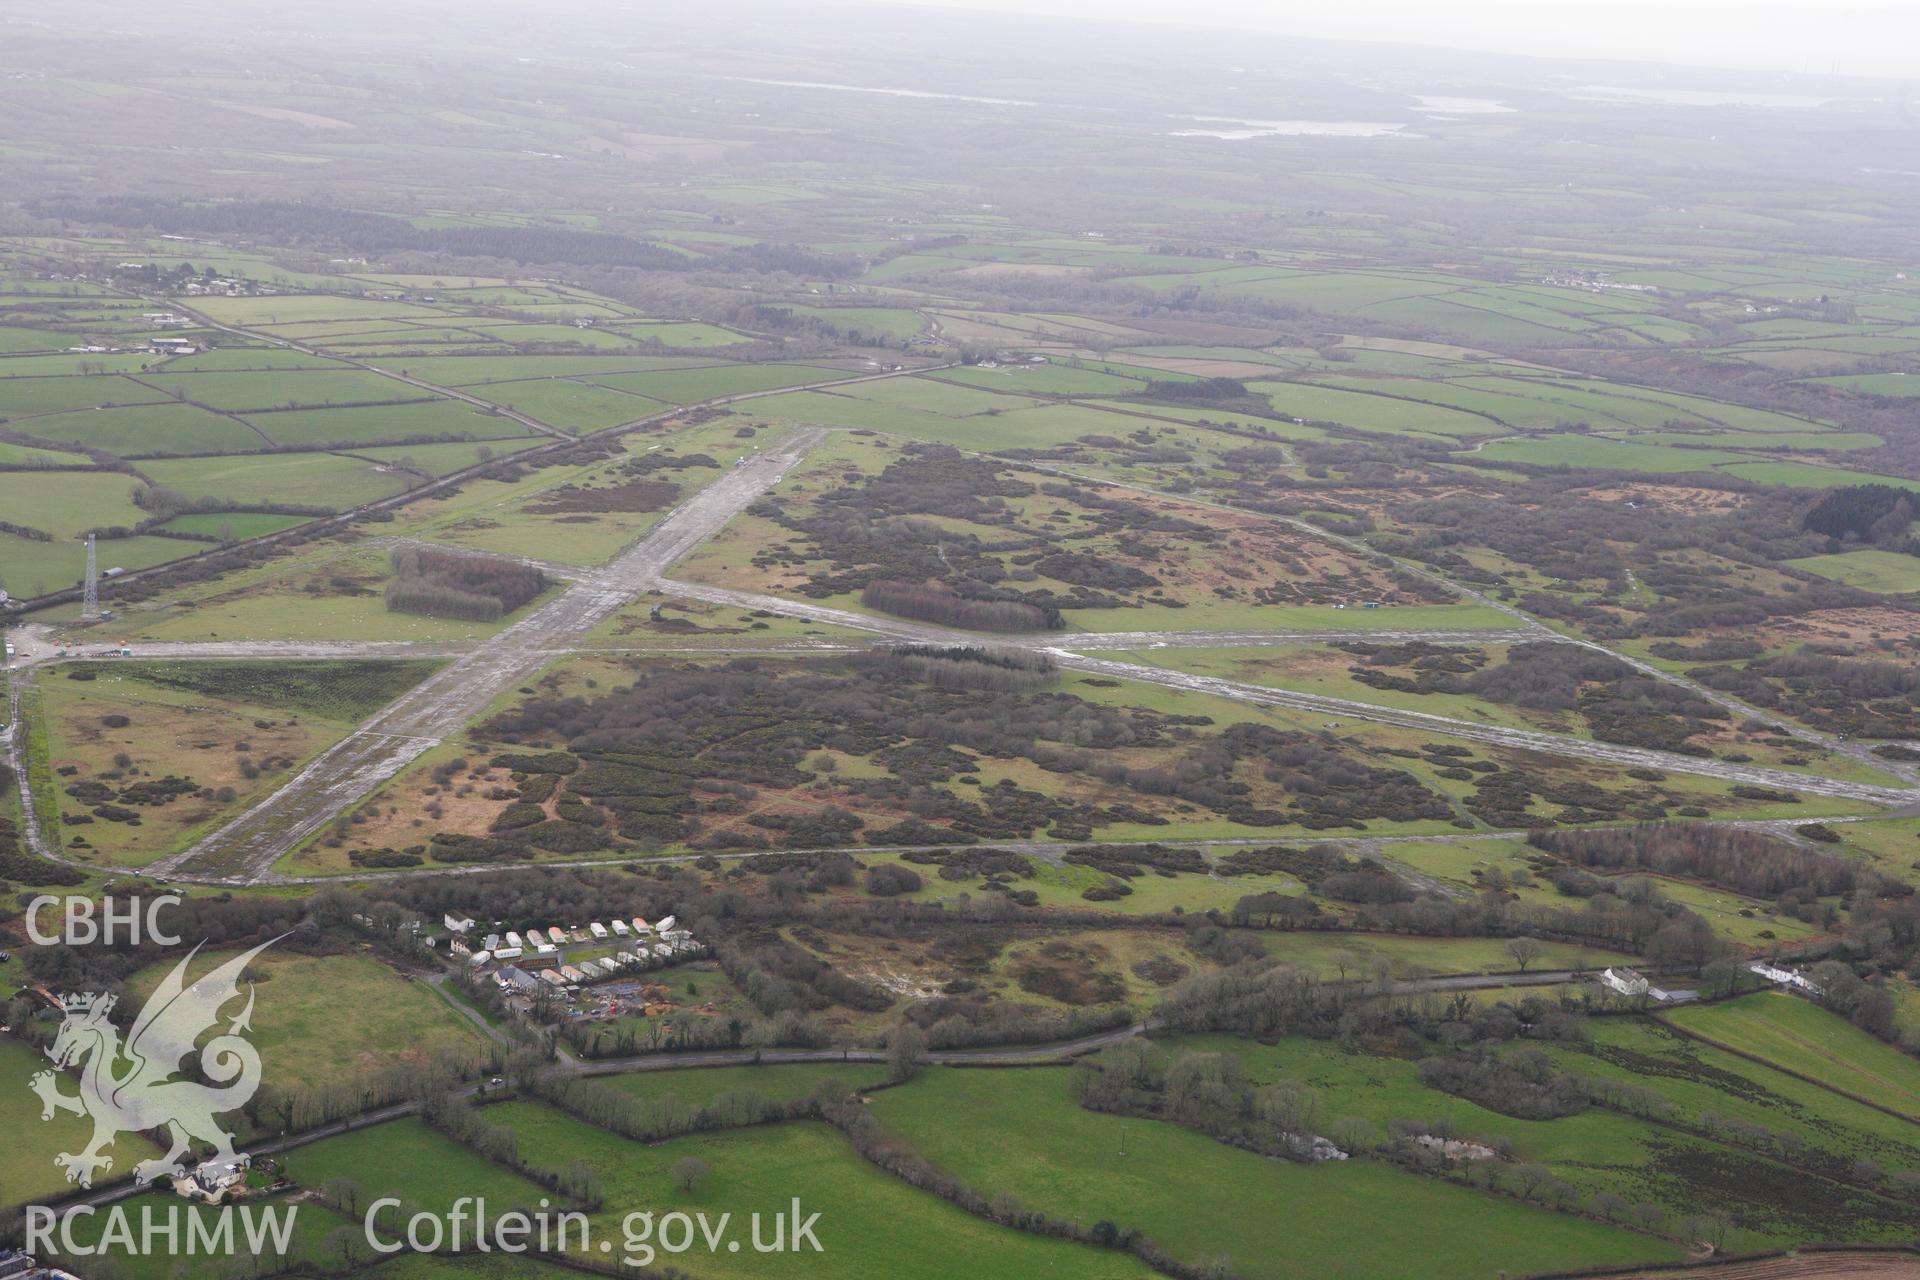 RCAHMW colour oblique photograph of Templeton Airfield, Templeton. Taken by Toby Driver on 27/01/2012.